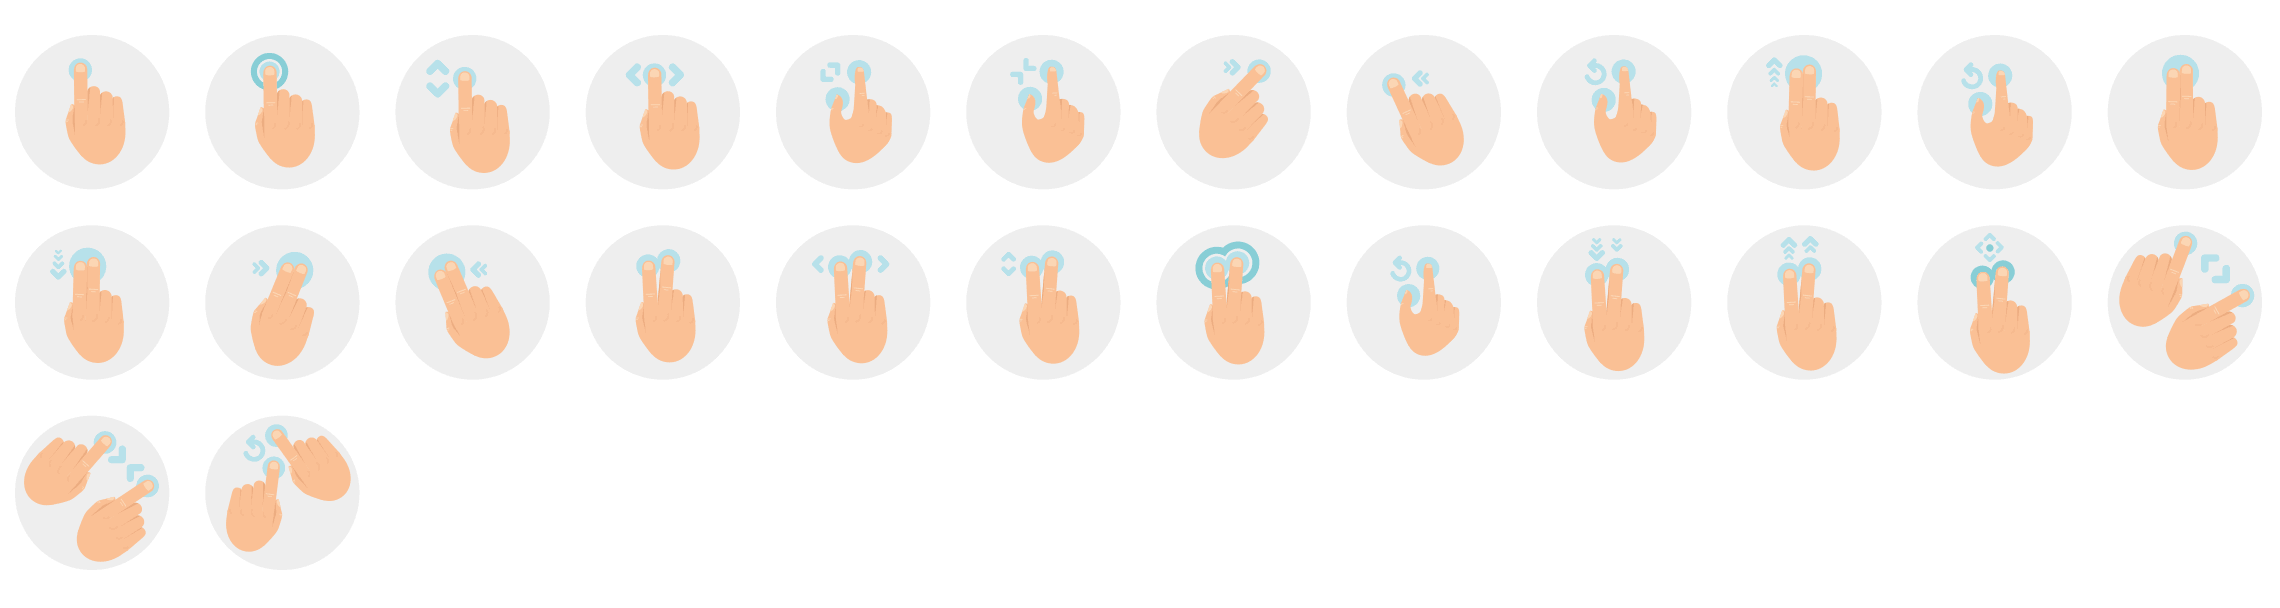 hand-gestures-flat-icons-vol-1-preview